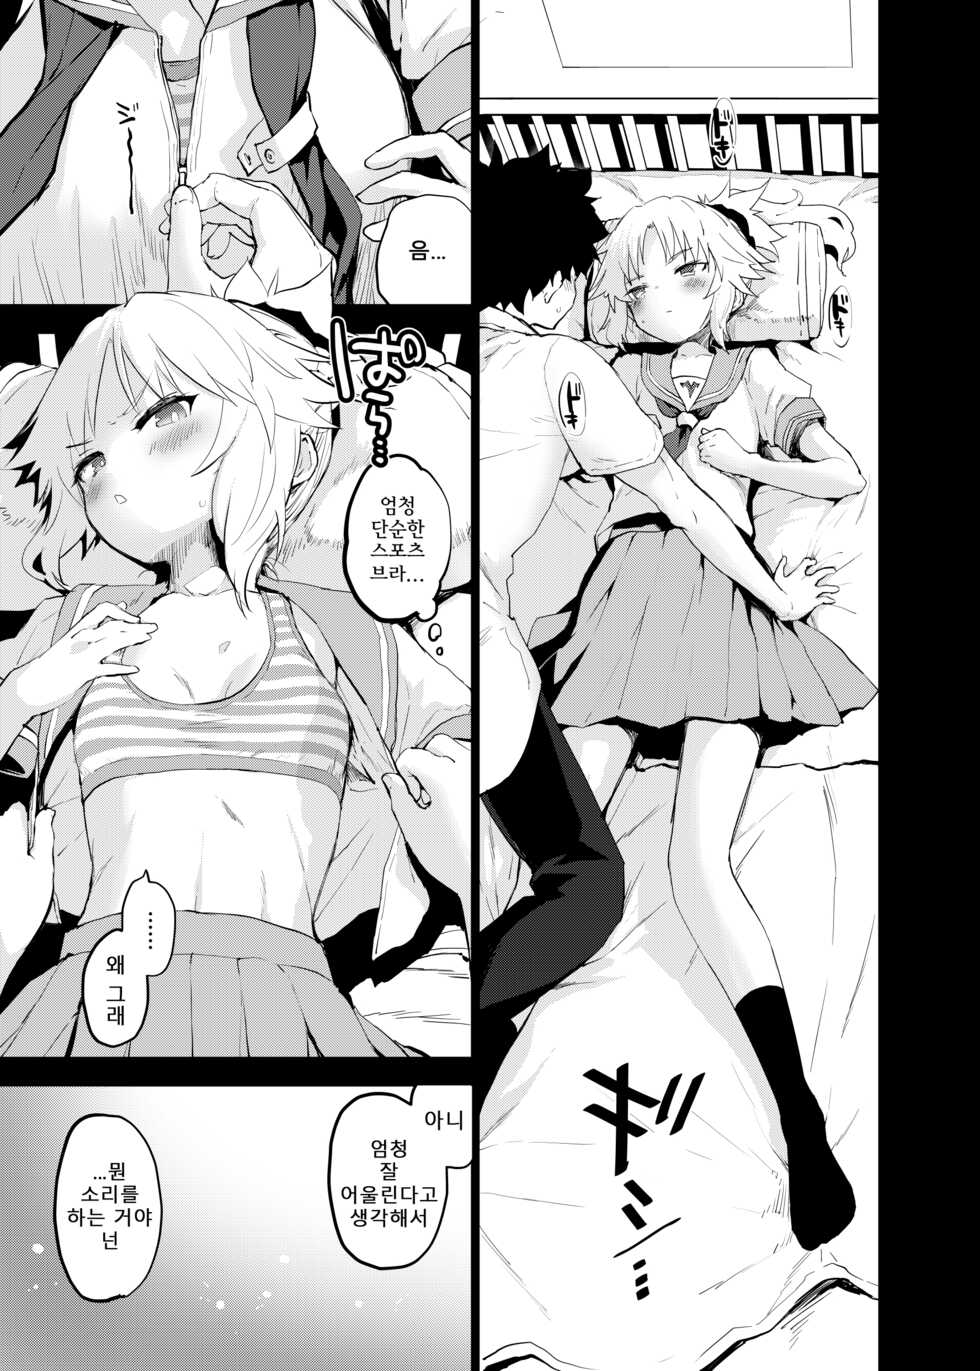 [Peθ (Mozu)] ApocryFucking' School Life Collabo Event <ROUTE: MORDRED> | ApocryFucking' 스쿨 라이프 콜라보 이벤트 <ROUTE: MORDRED> (Fate/Grand Order) [Korean] [Digital] - Page 5